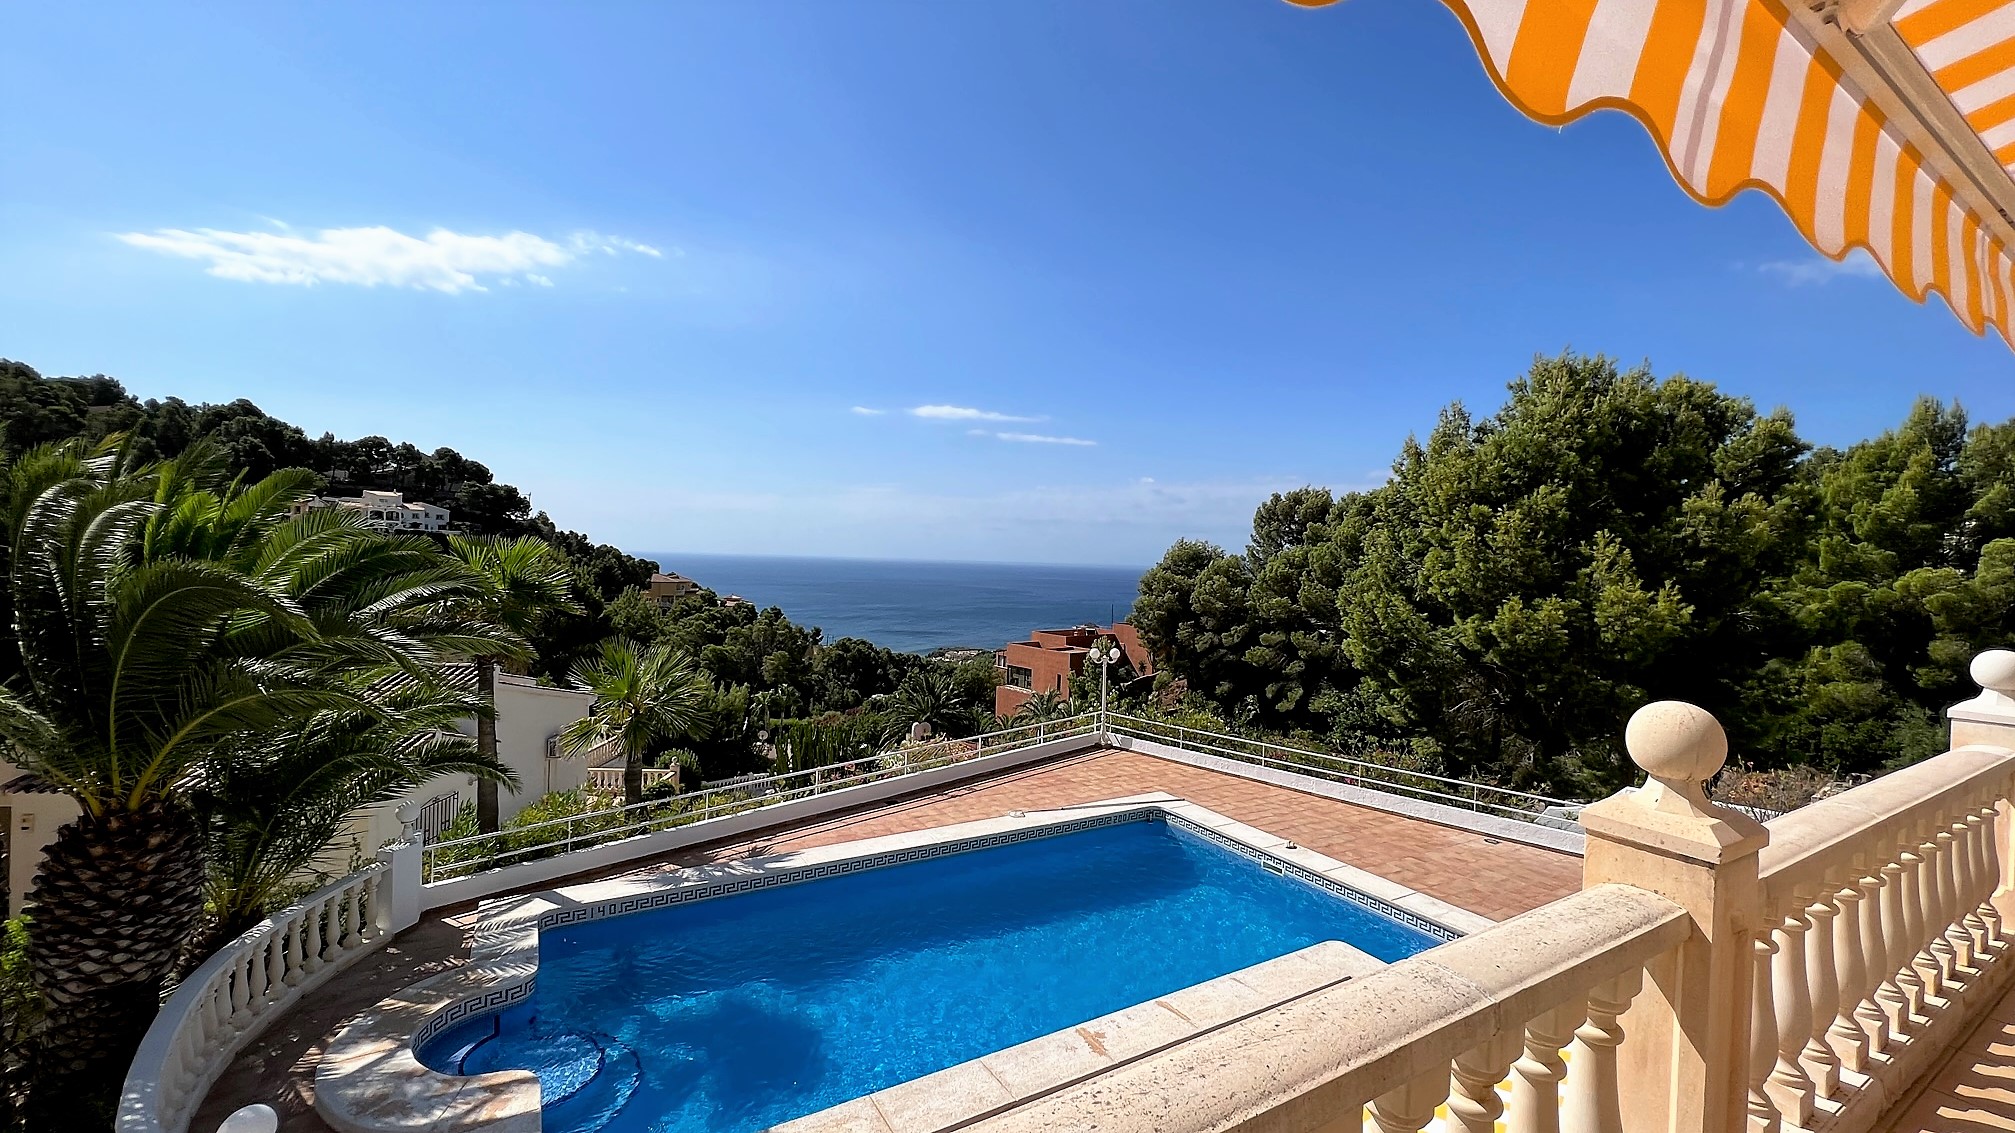 Well maintained villa with sea views in Altea
dJ